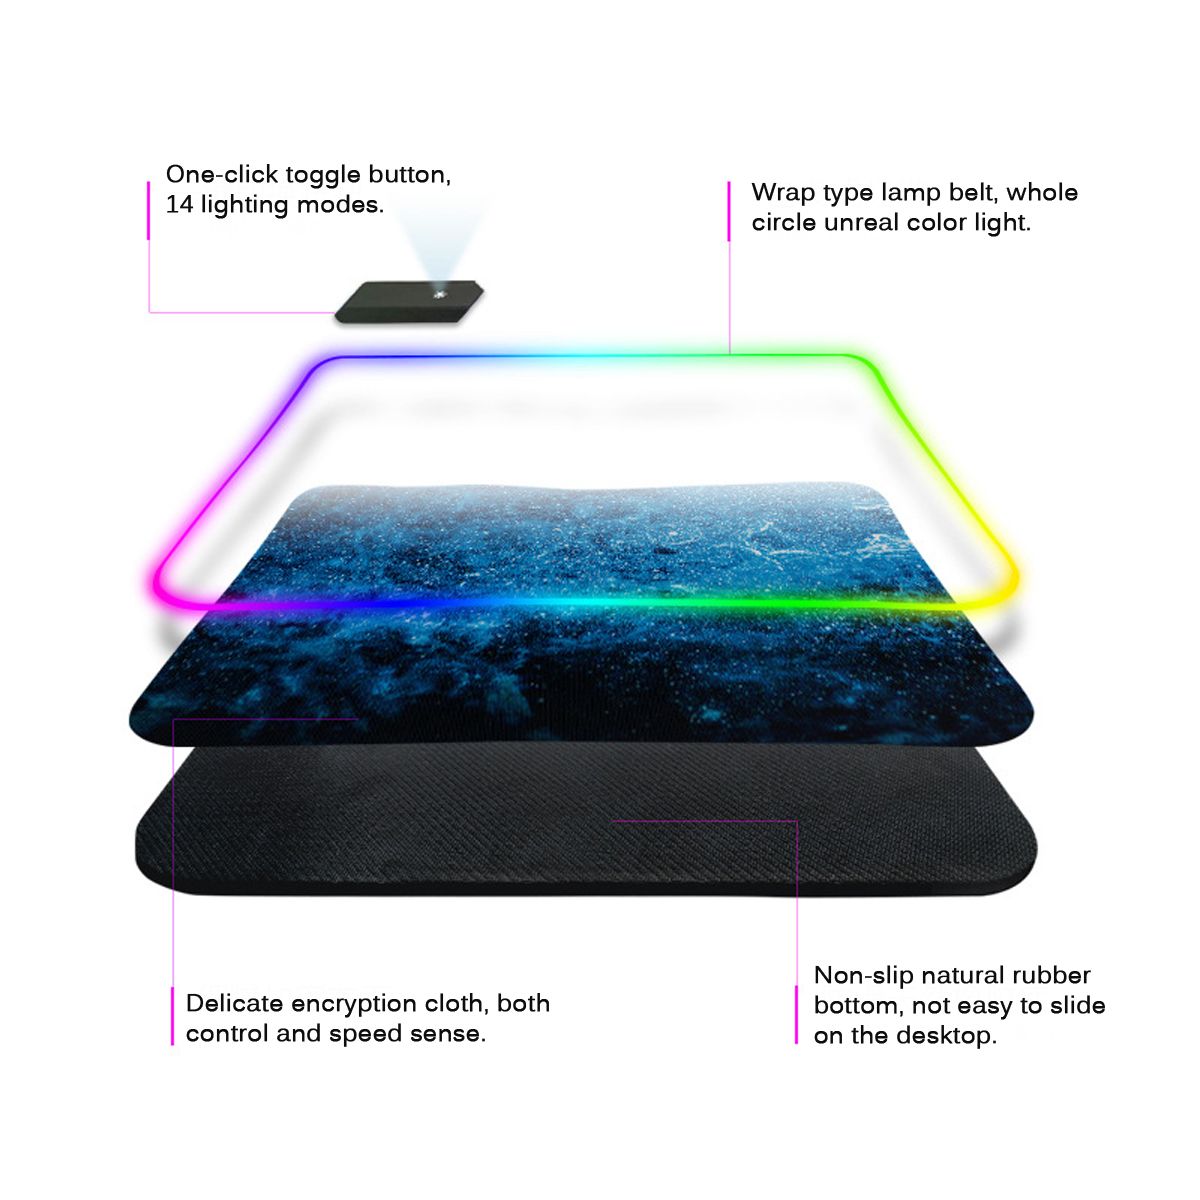 Starry-Sky-Mouse-Pad-RGB-Non-Slip-Thickened-Keyboard-Mouse-Gaming-Pad-Desktop-Mat-1742904